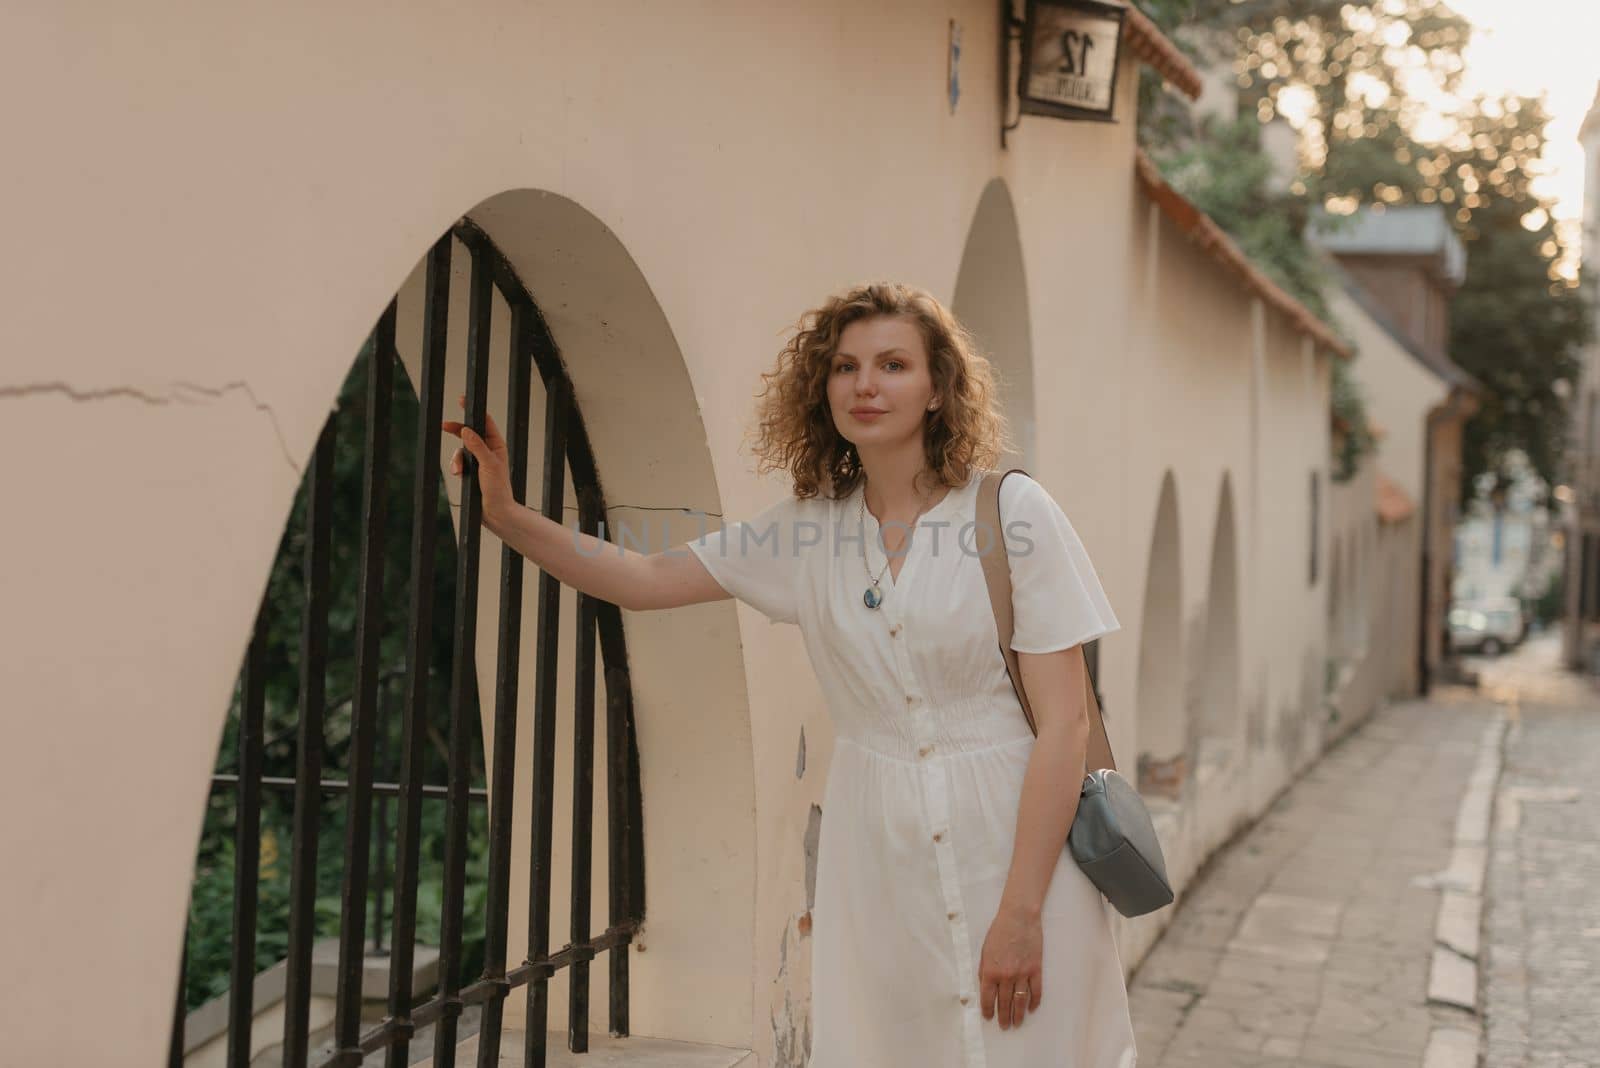 A woman with curly hair is holding on to a bar of a metal lattice in an old European town. A lady in a white dress in the evening.